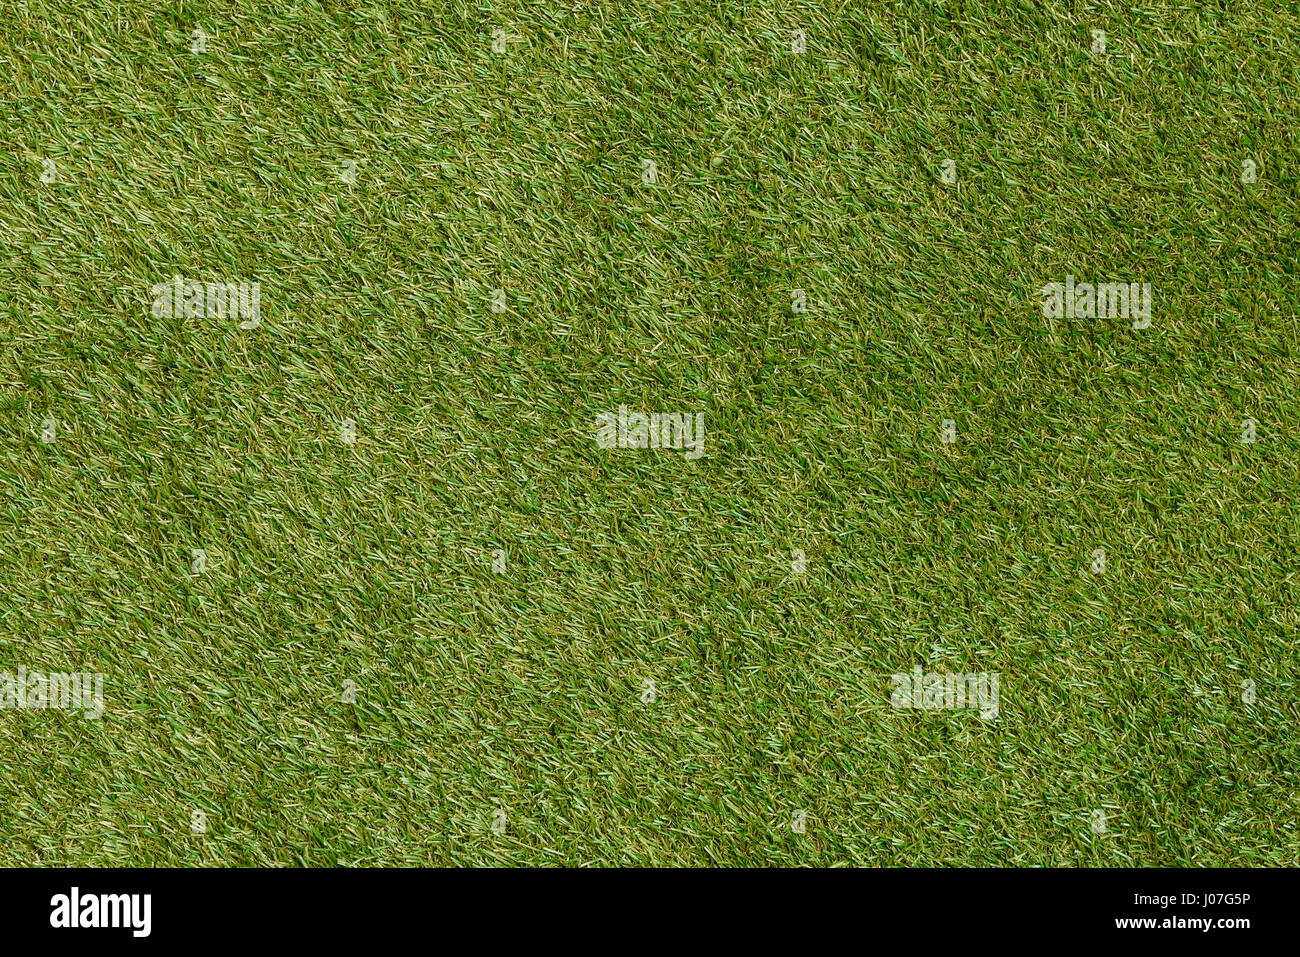 Close up of plastic artificial grass Stock Photo